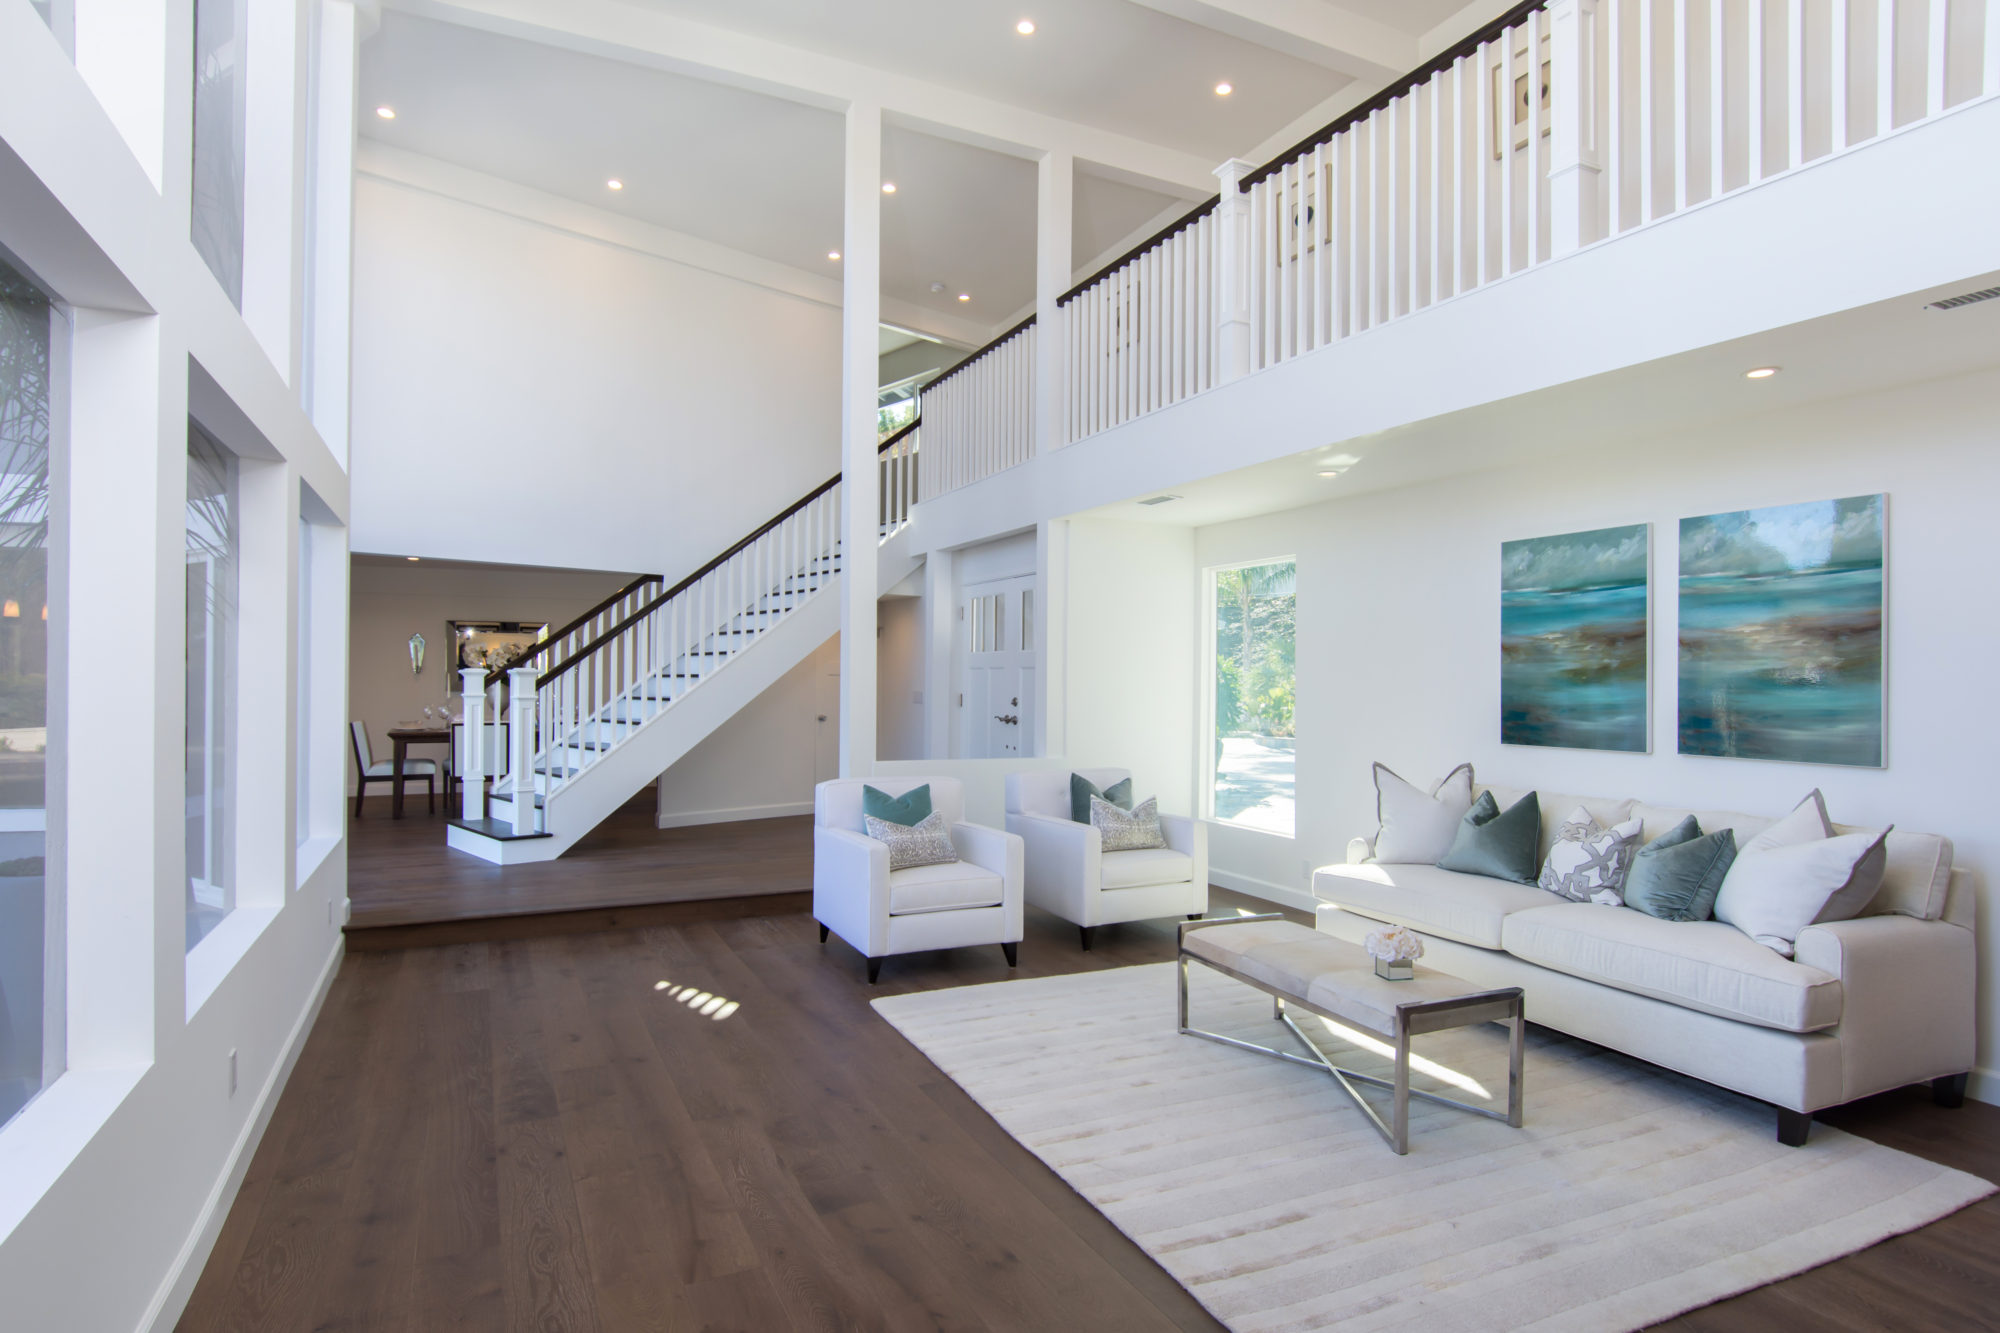 A living room with stairs and white furniture.